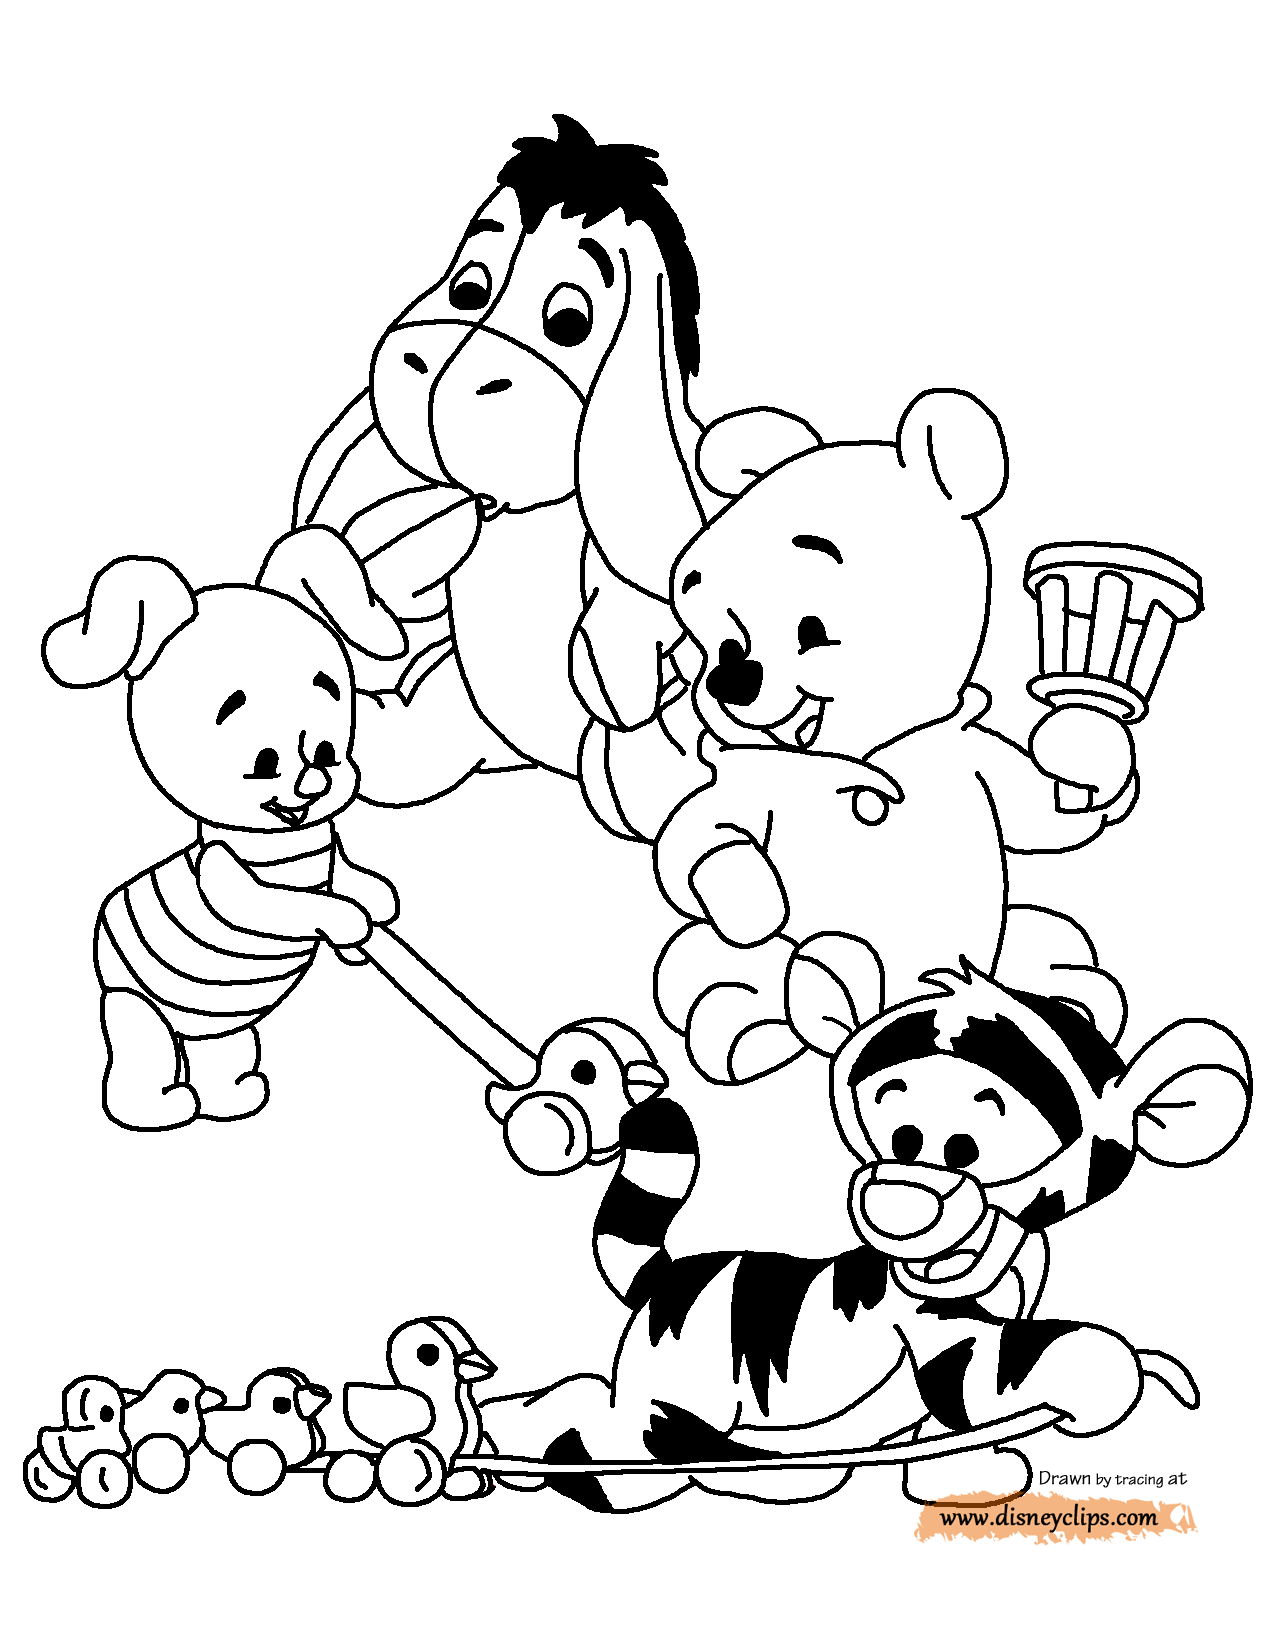 Baby Pooh Printable Coloring Pages | Disney Coloring Book - Coloring Home